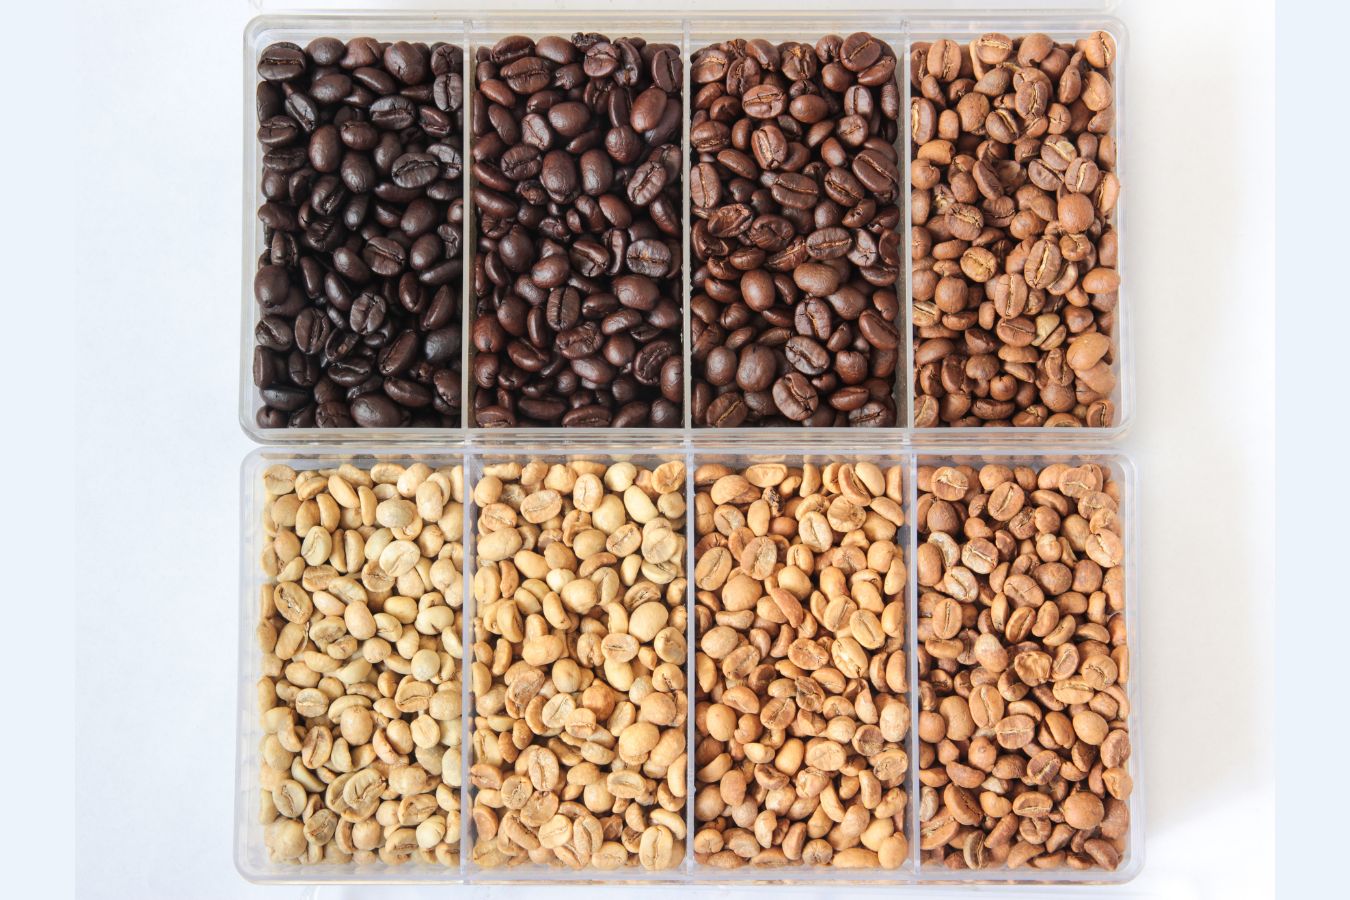 How To Know The Coffee Roasting Level